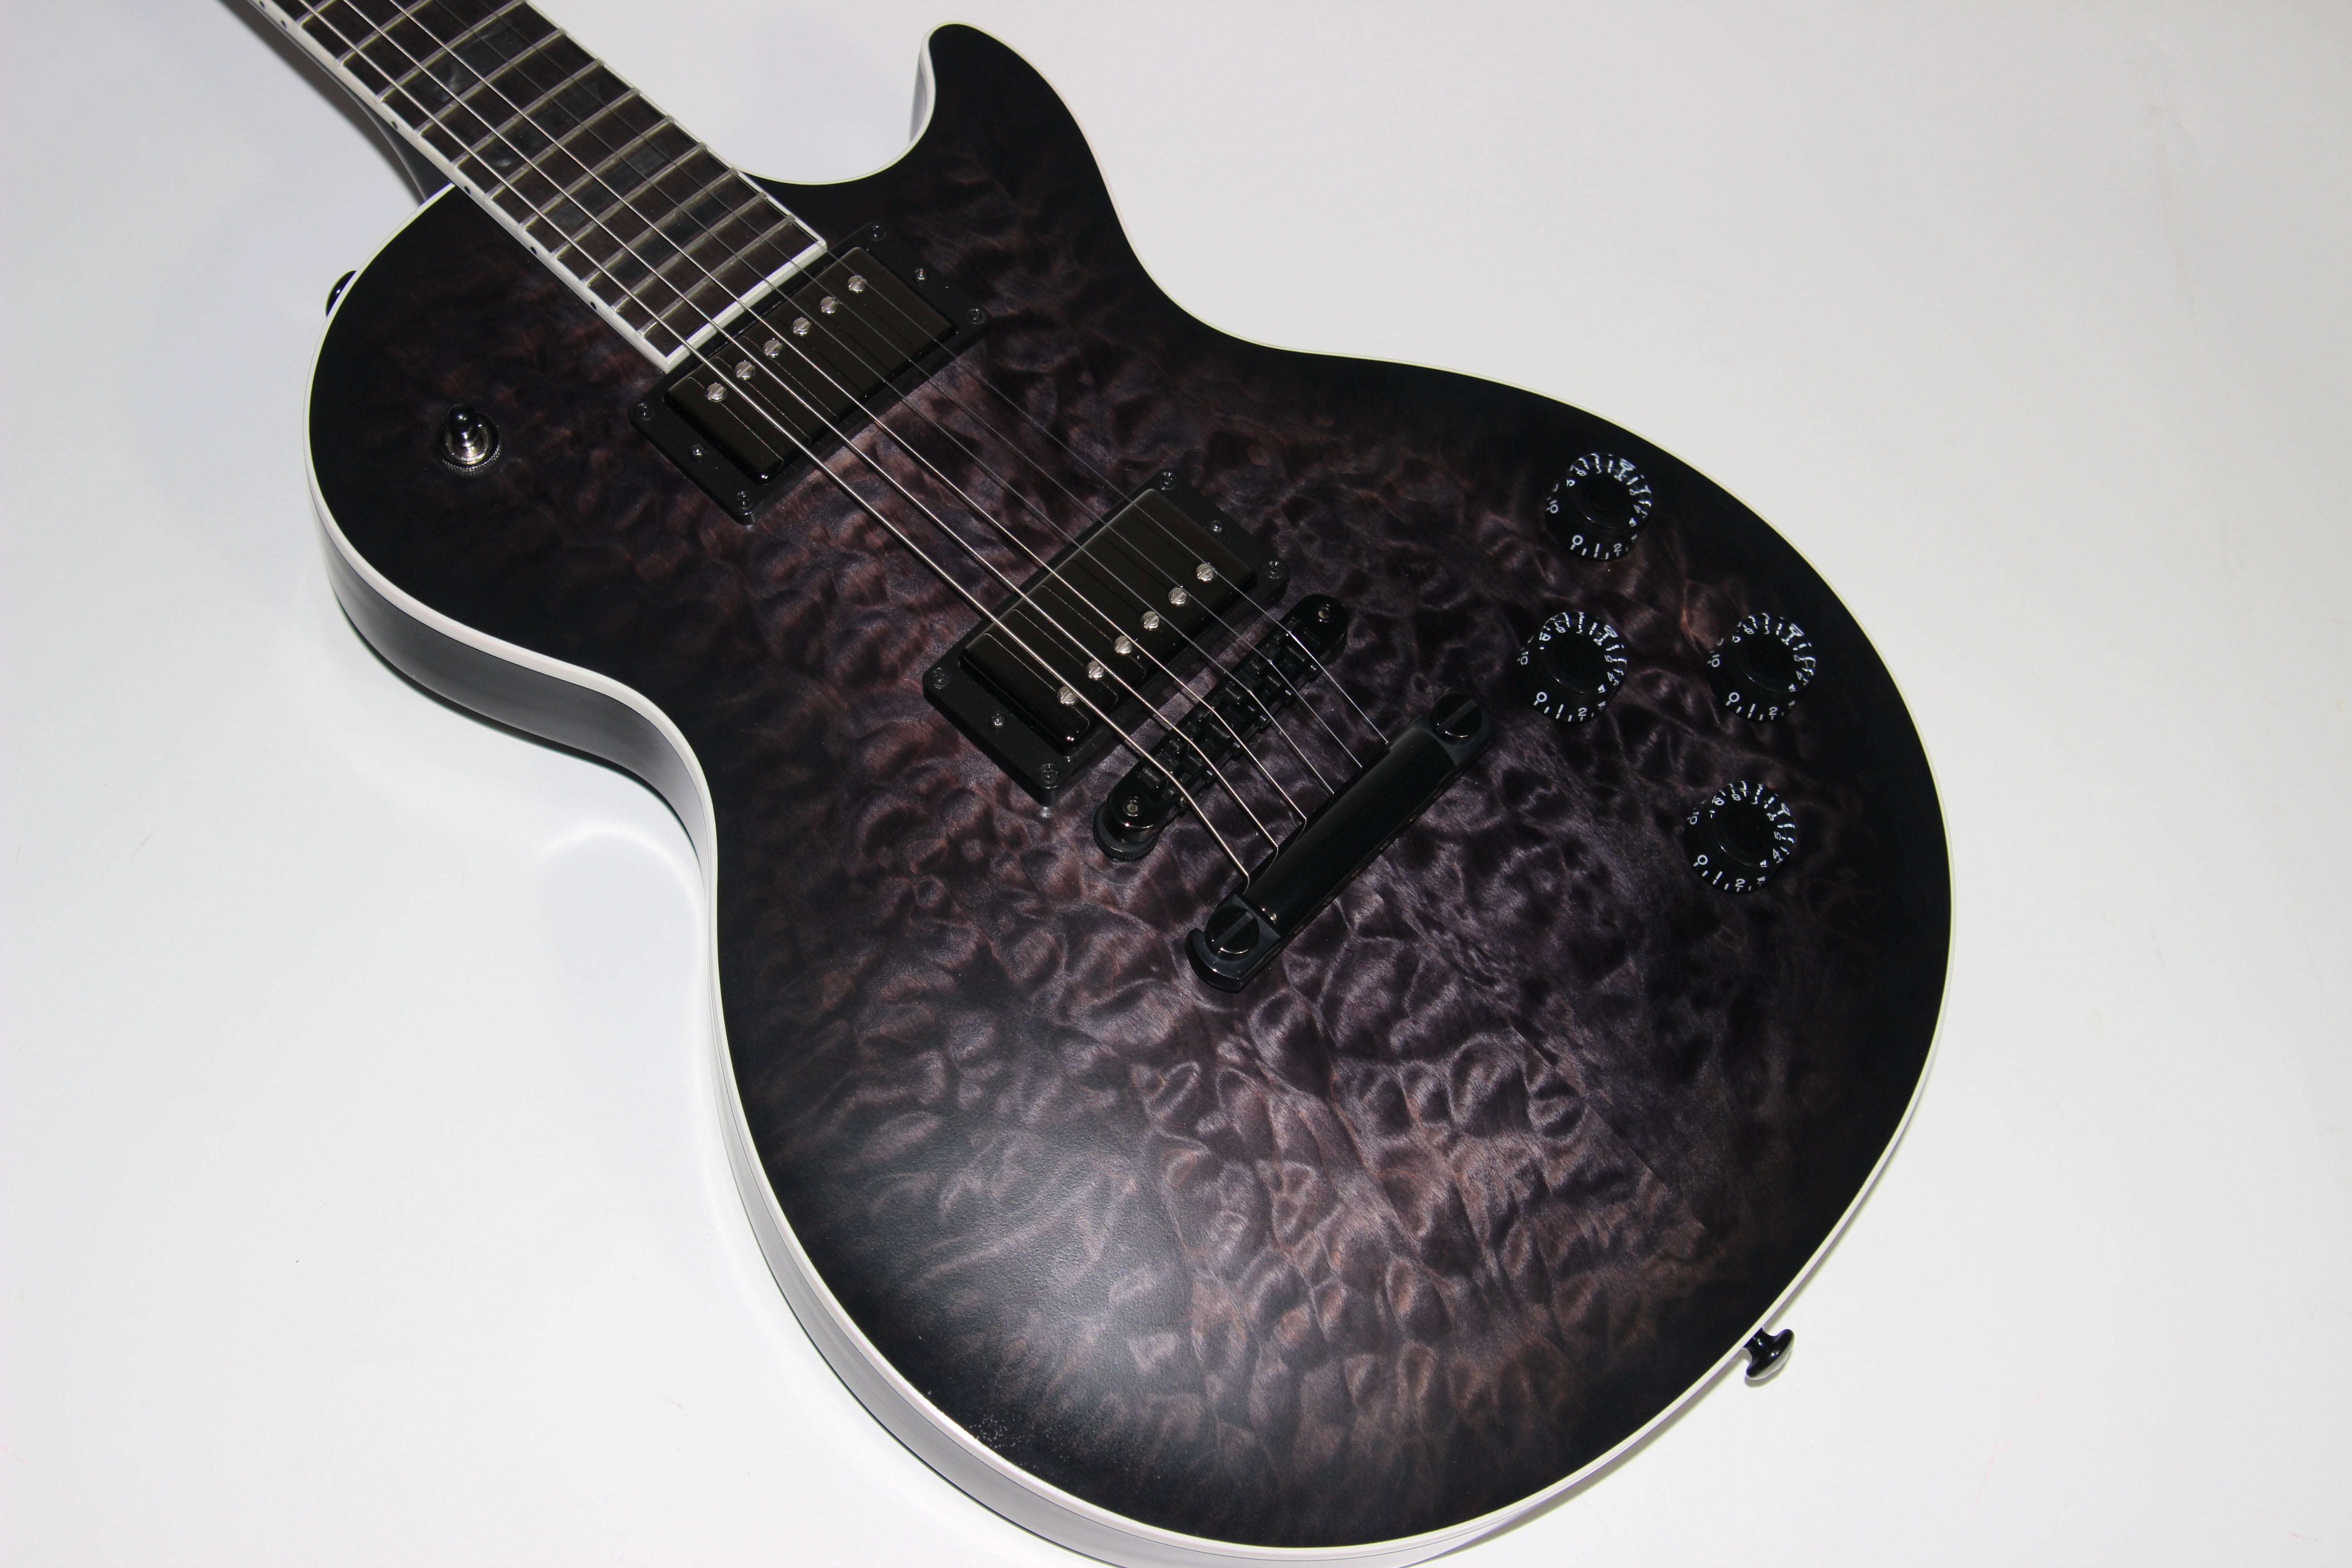 *SOLD*  2019 Gibson Les Paul Dark Knight Limited Edition QUILT TOP - Ebony, Transparent Smoke Black Satin